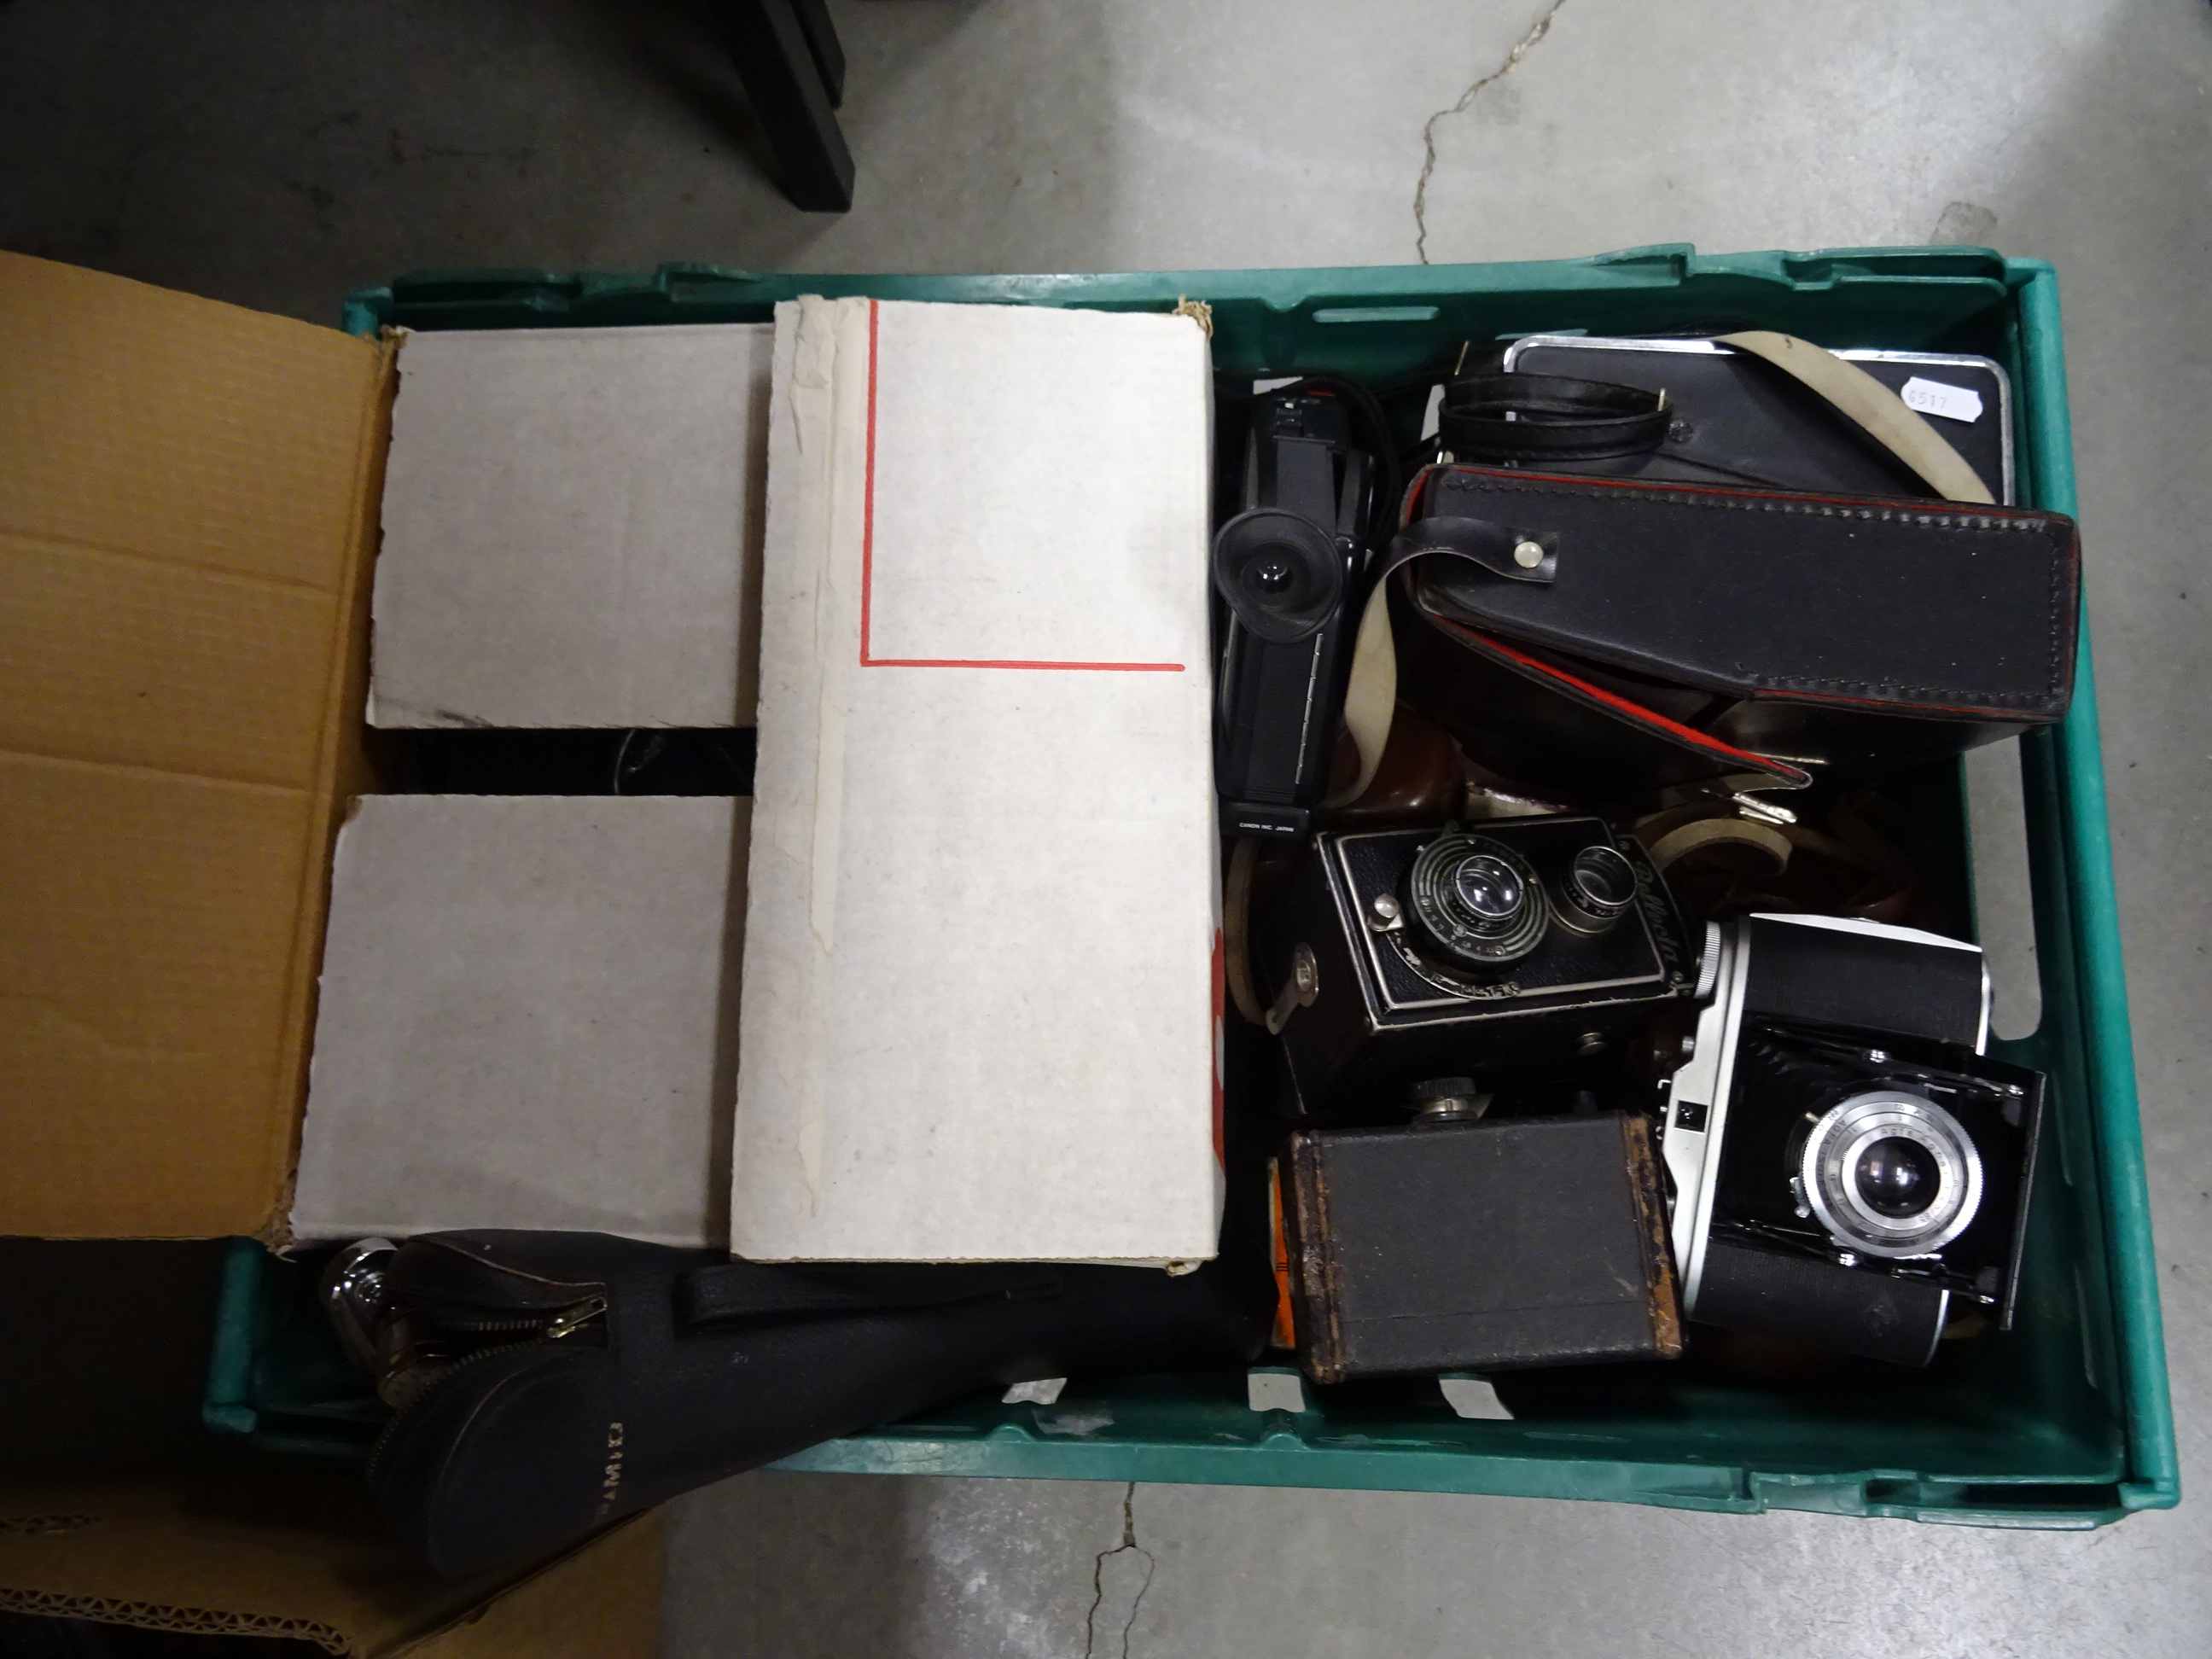 Photography slide projector in box along with a selection of antique cameras including film and cine